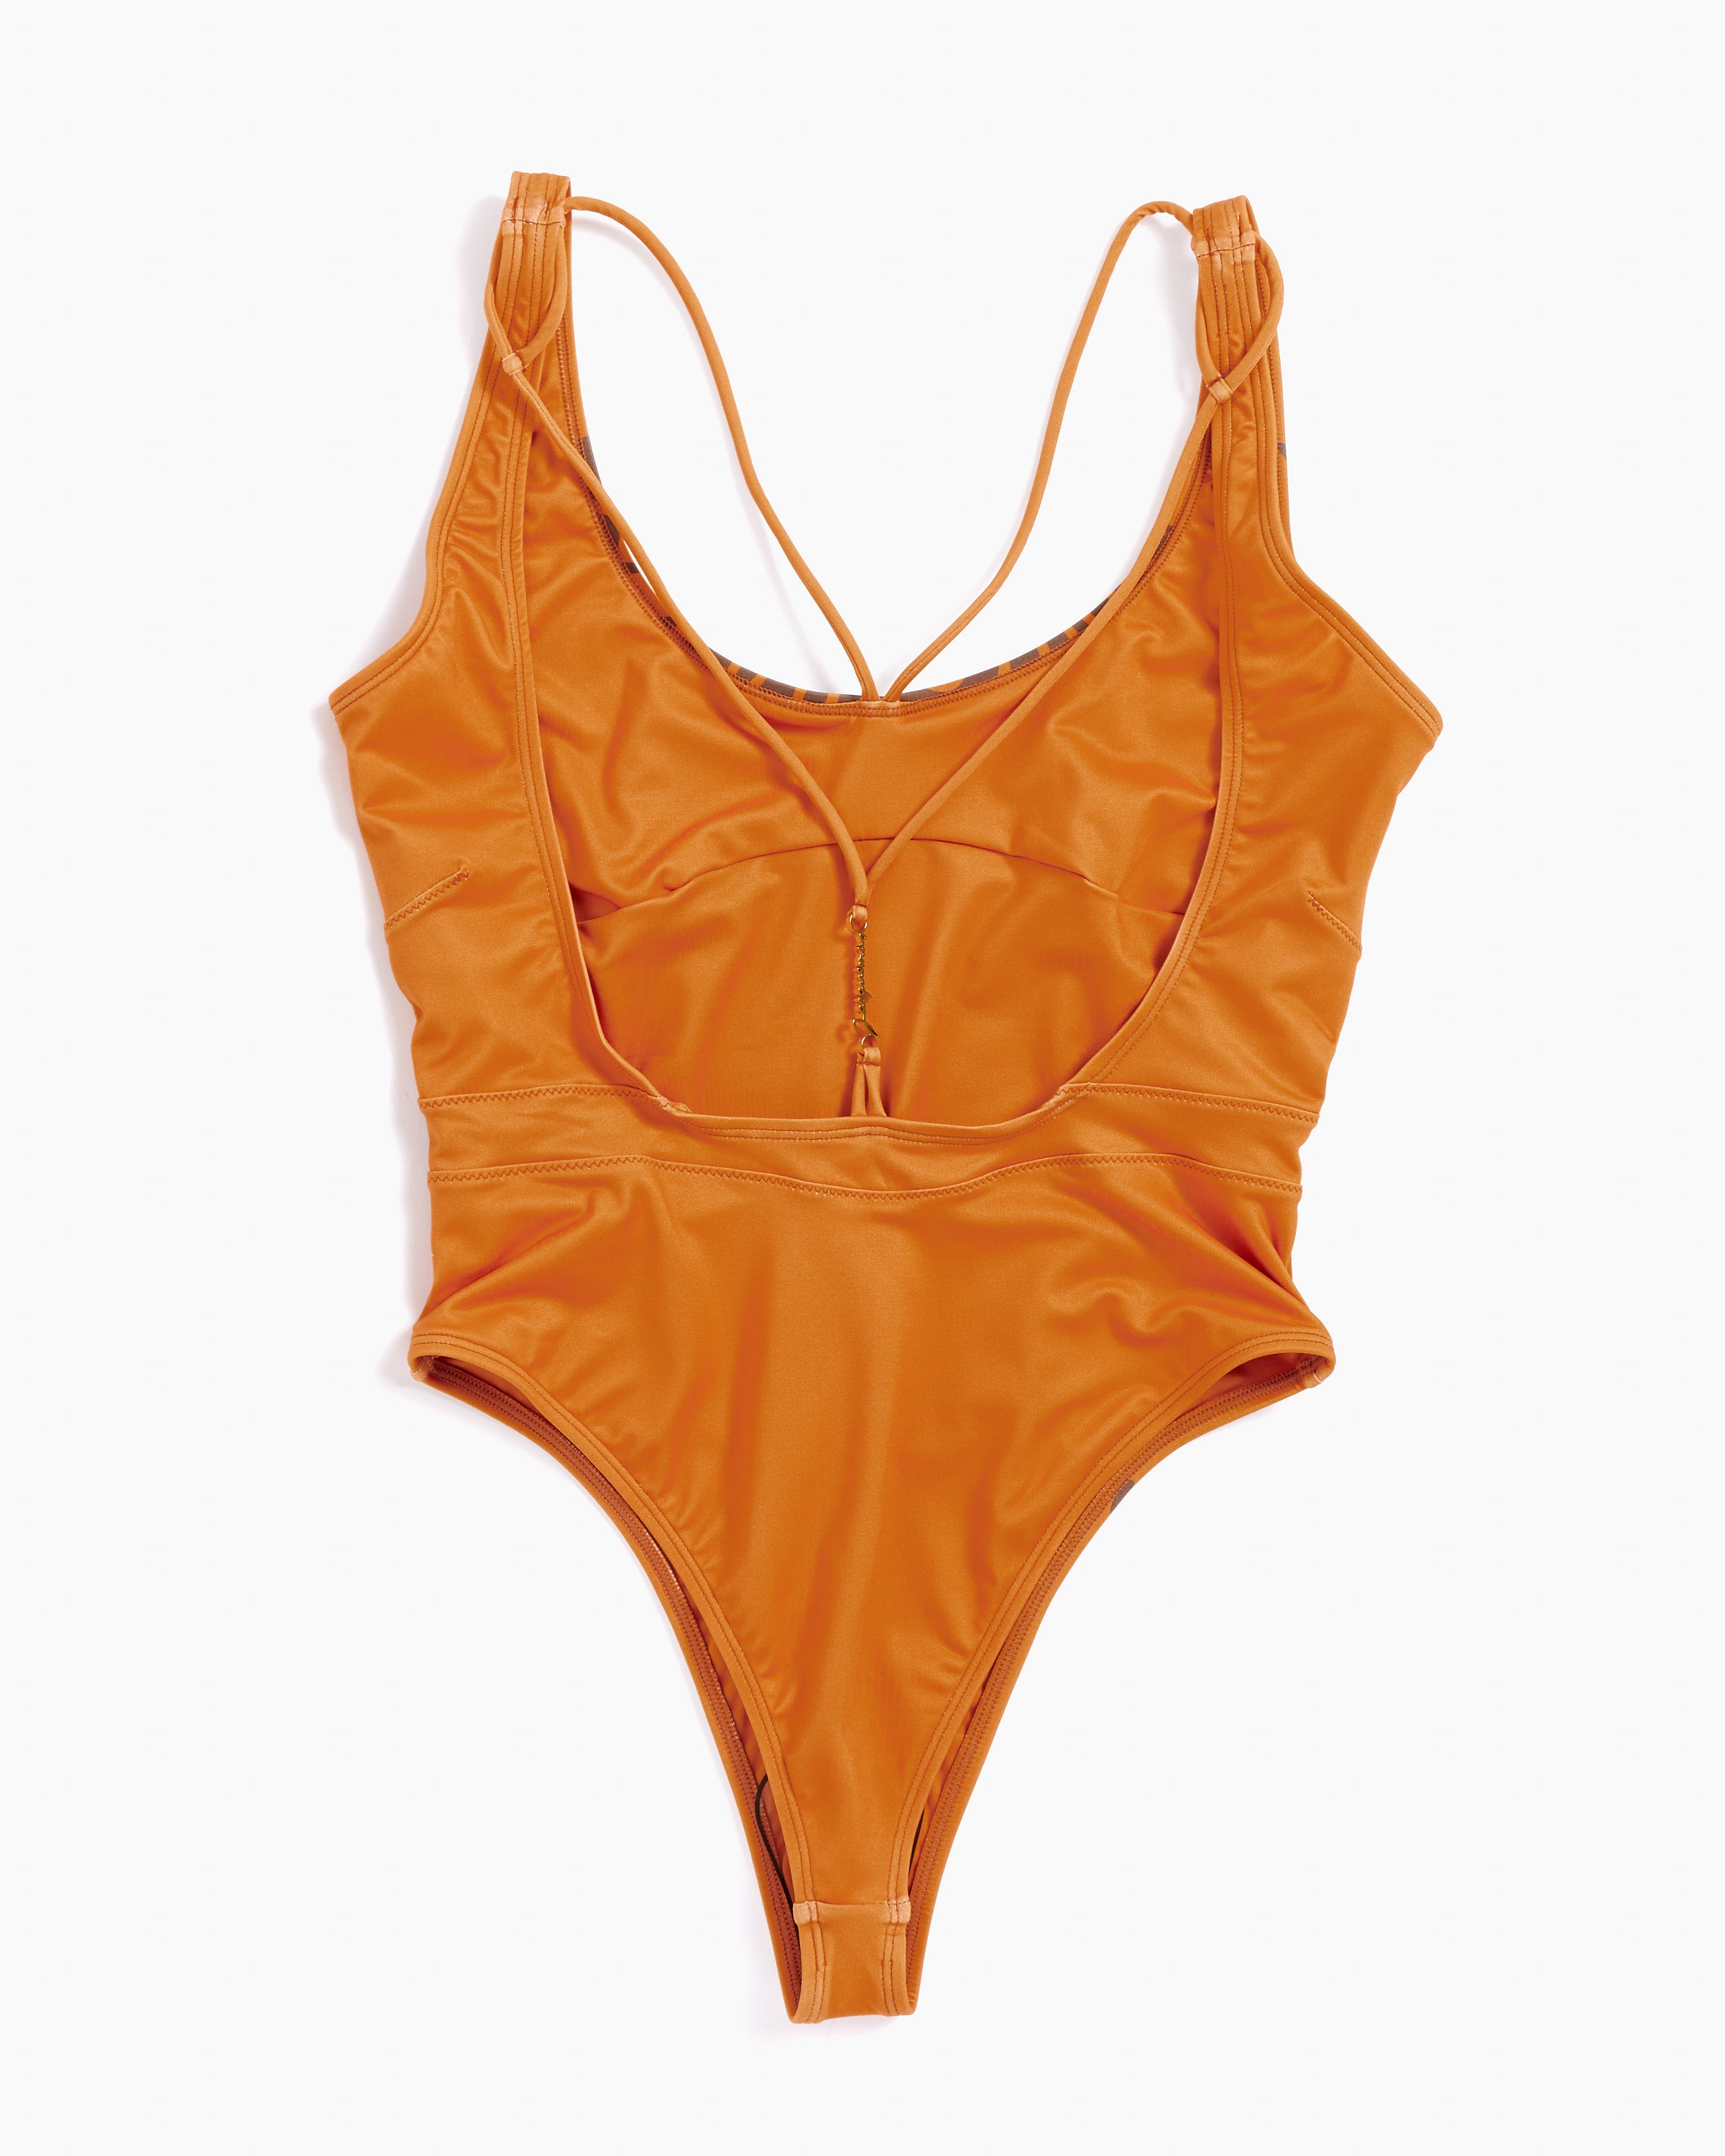 Canada Maple Leaf One Piece Swimsuit